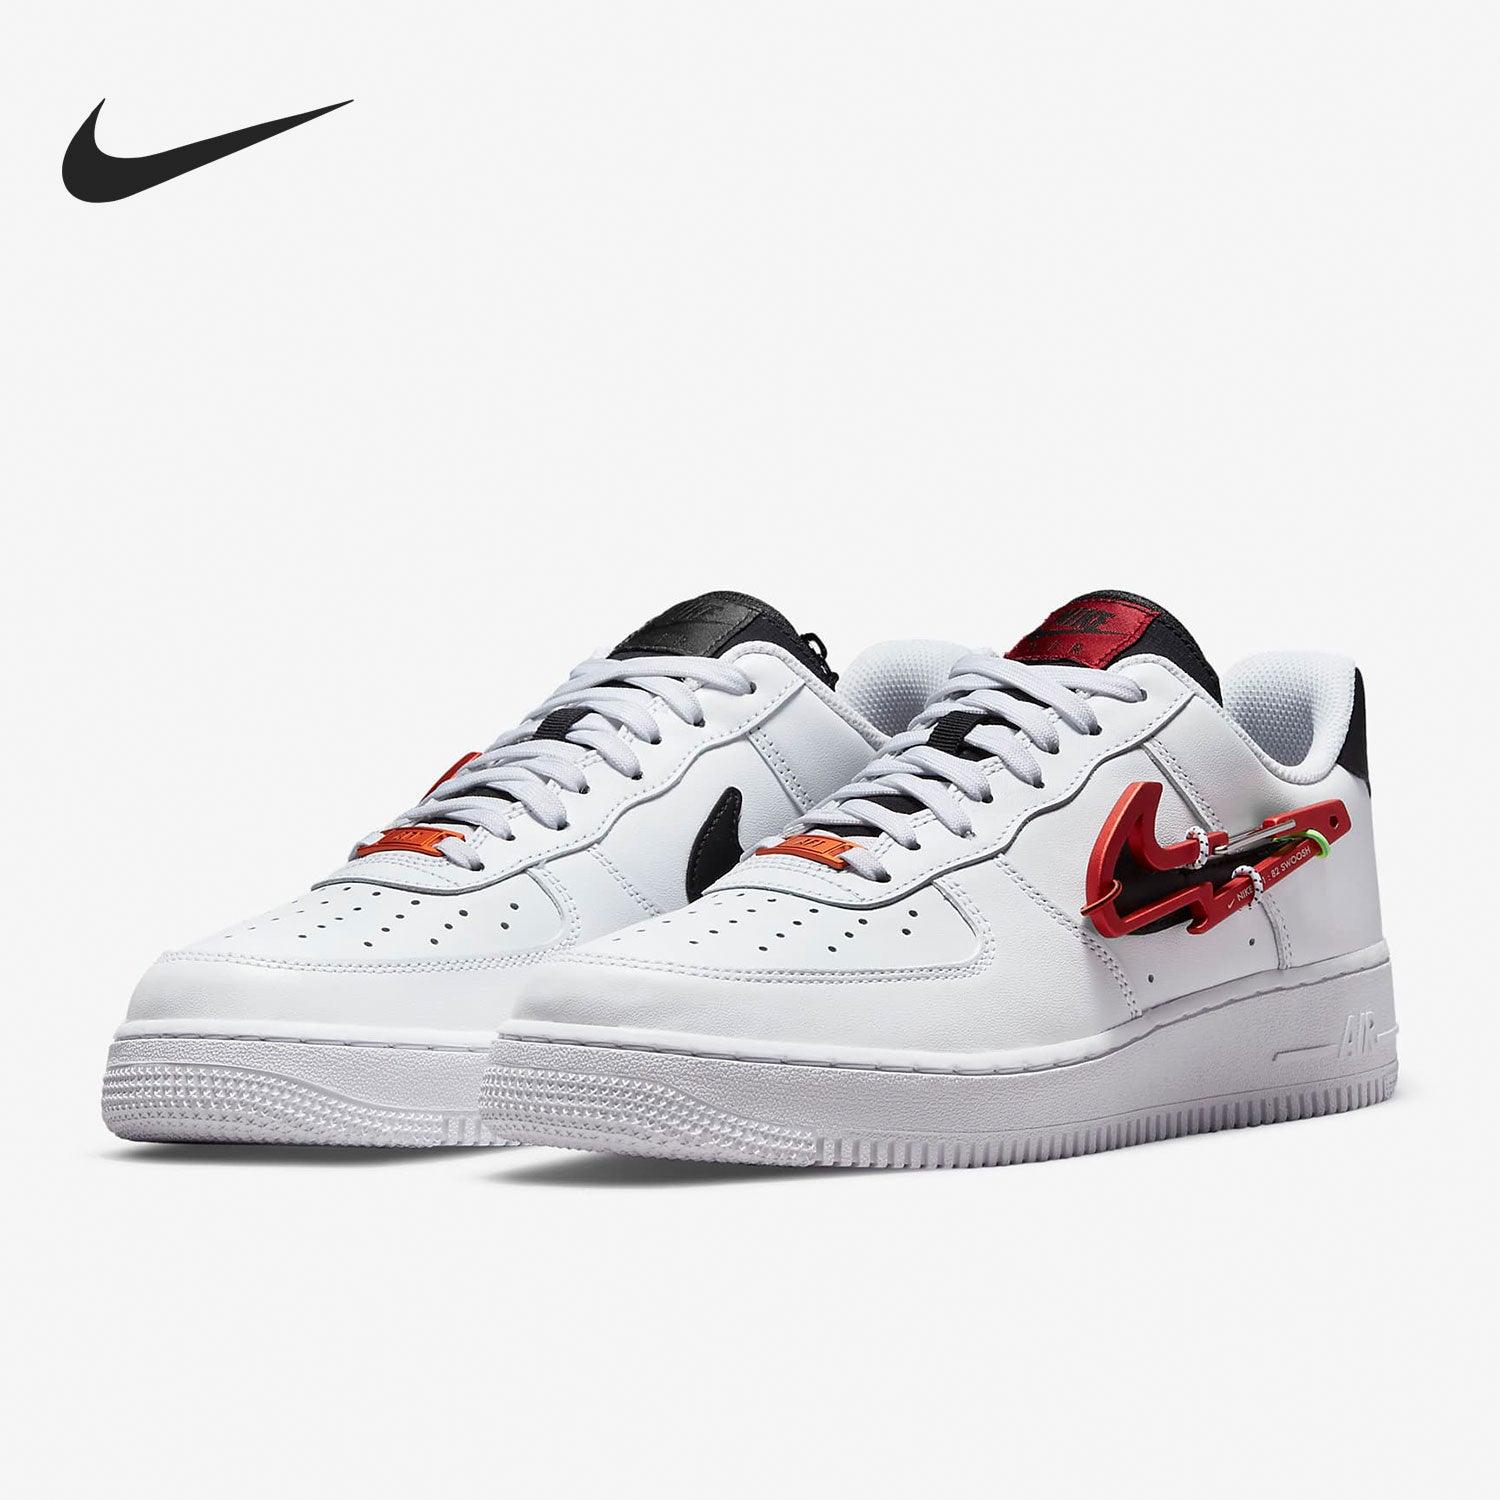 Nike Air force1 AF1 Air Force One sneakers carabiner black and white red sneakers - CADEAUME